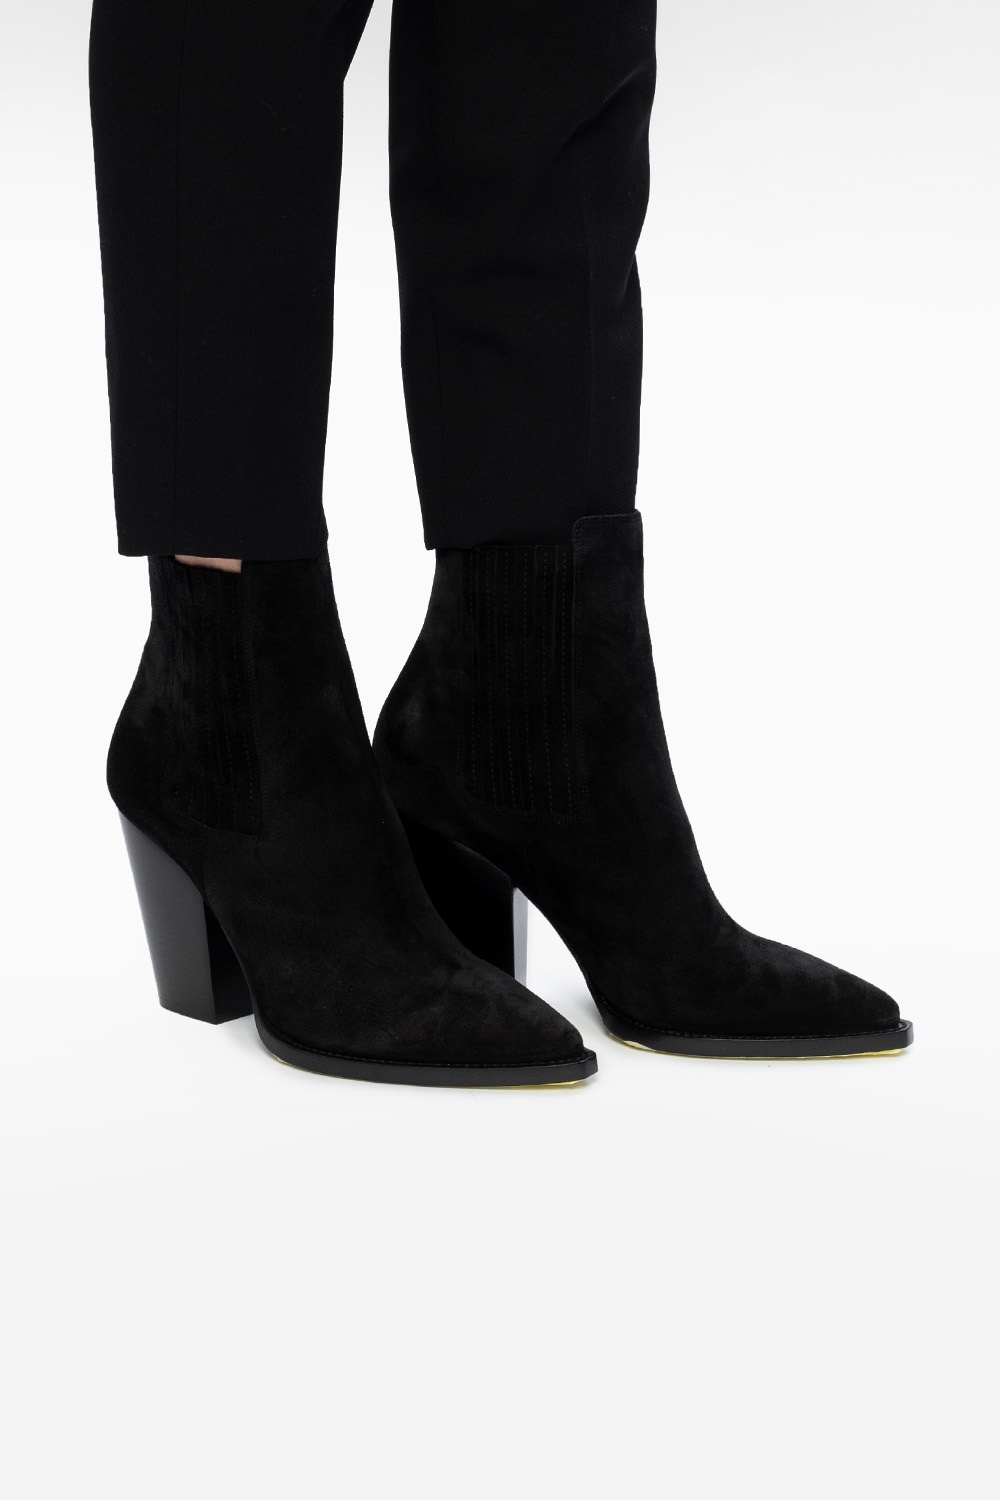 Saint Laurent 'Theo' heeled ankle boots | Women's Shoes | Vitkac